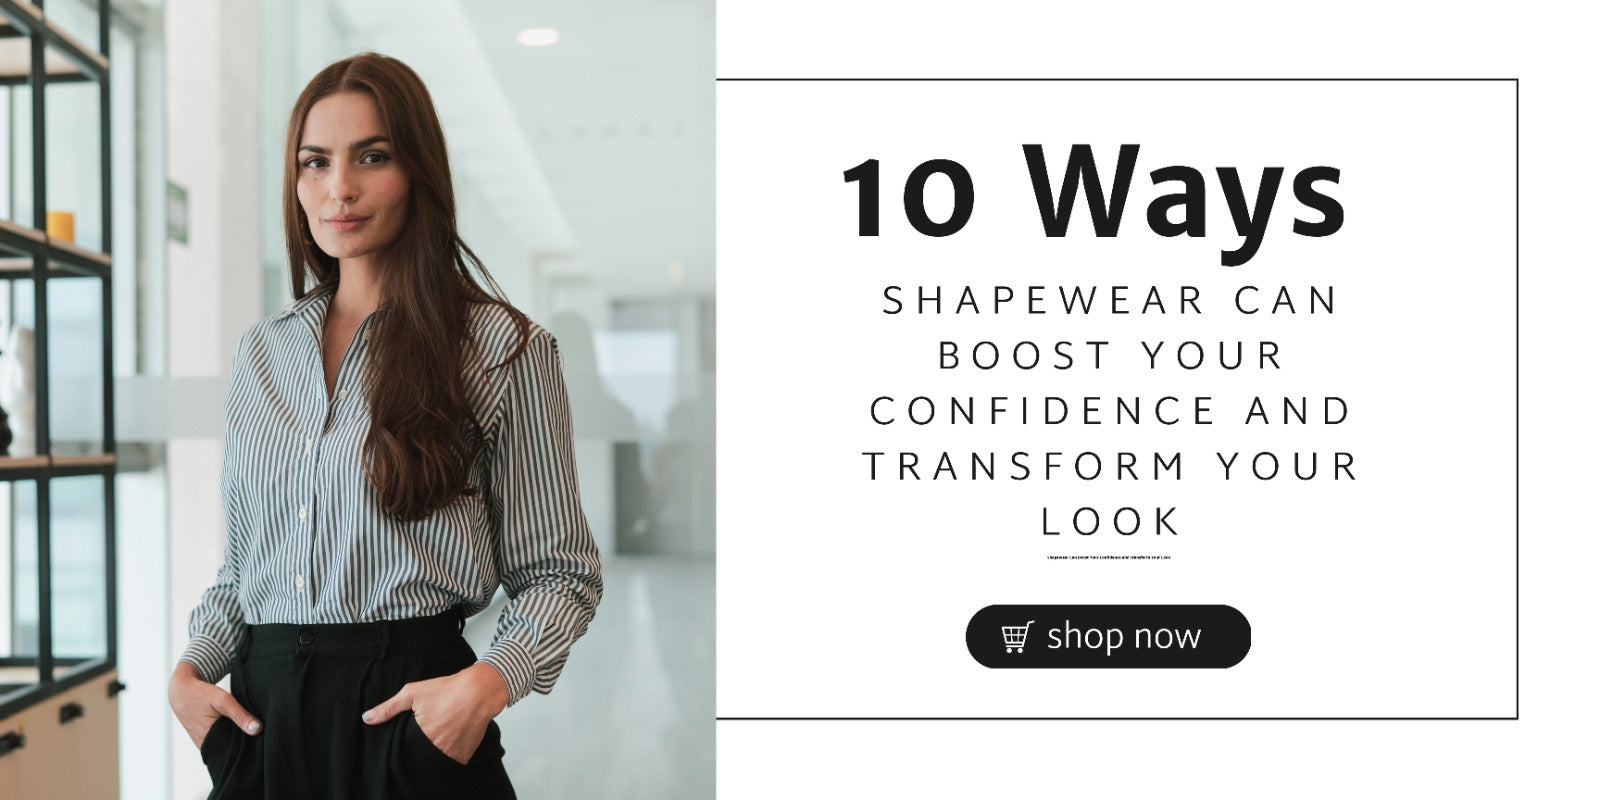 We can understand the confidence when you put on a Pinsy Shapewear